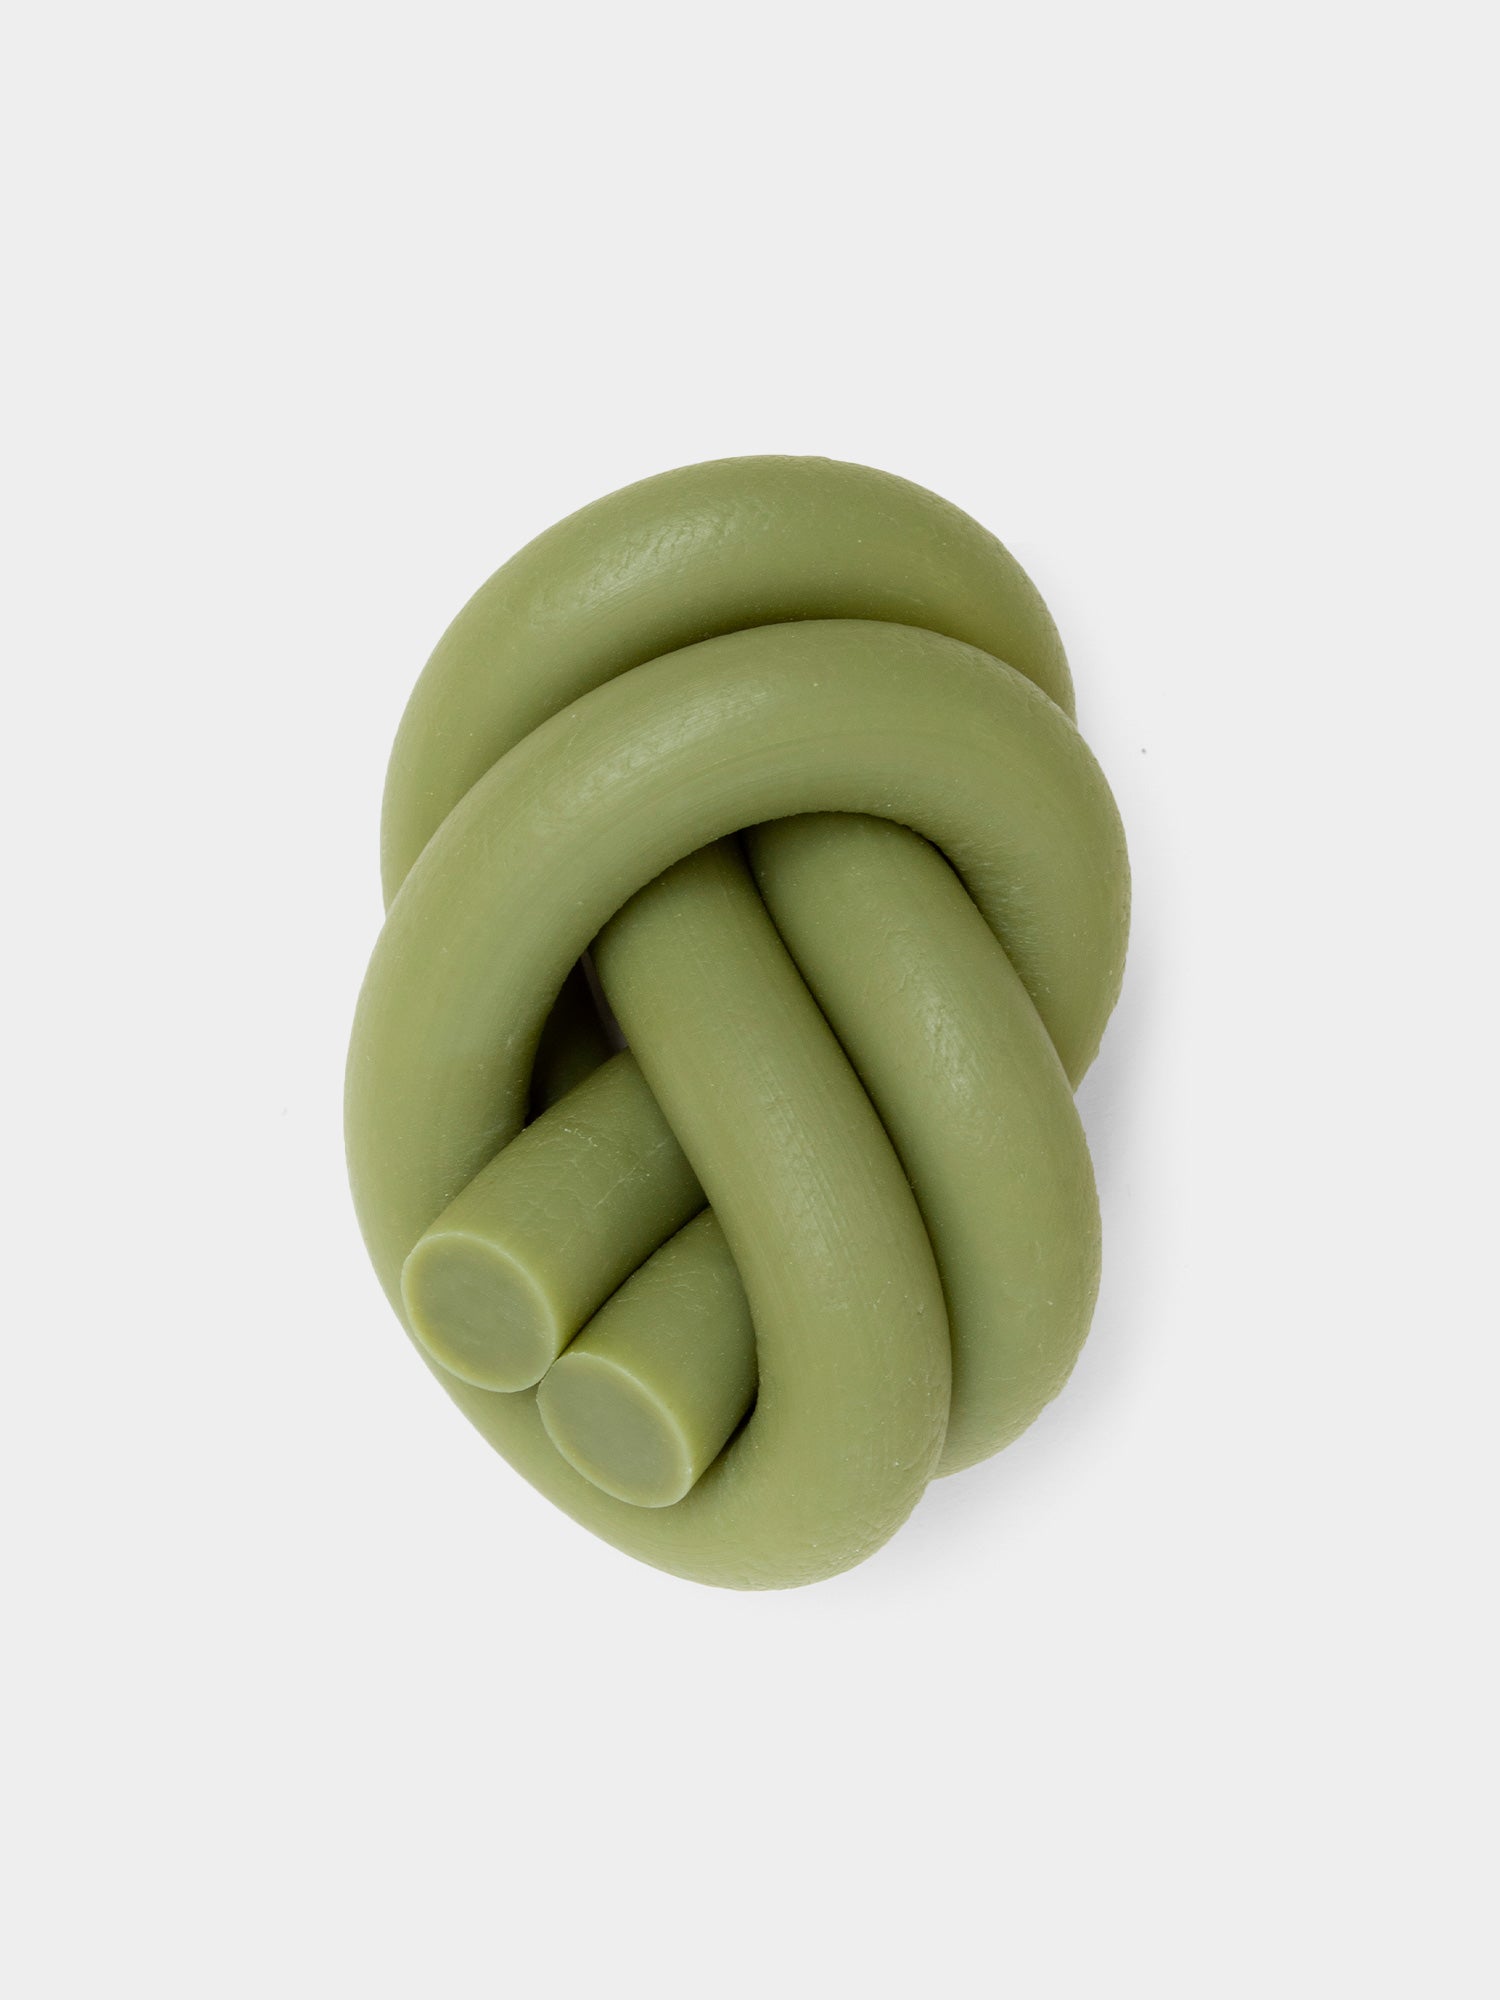 NOEUD Soap - Olive Green